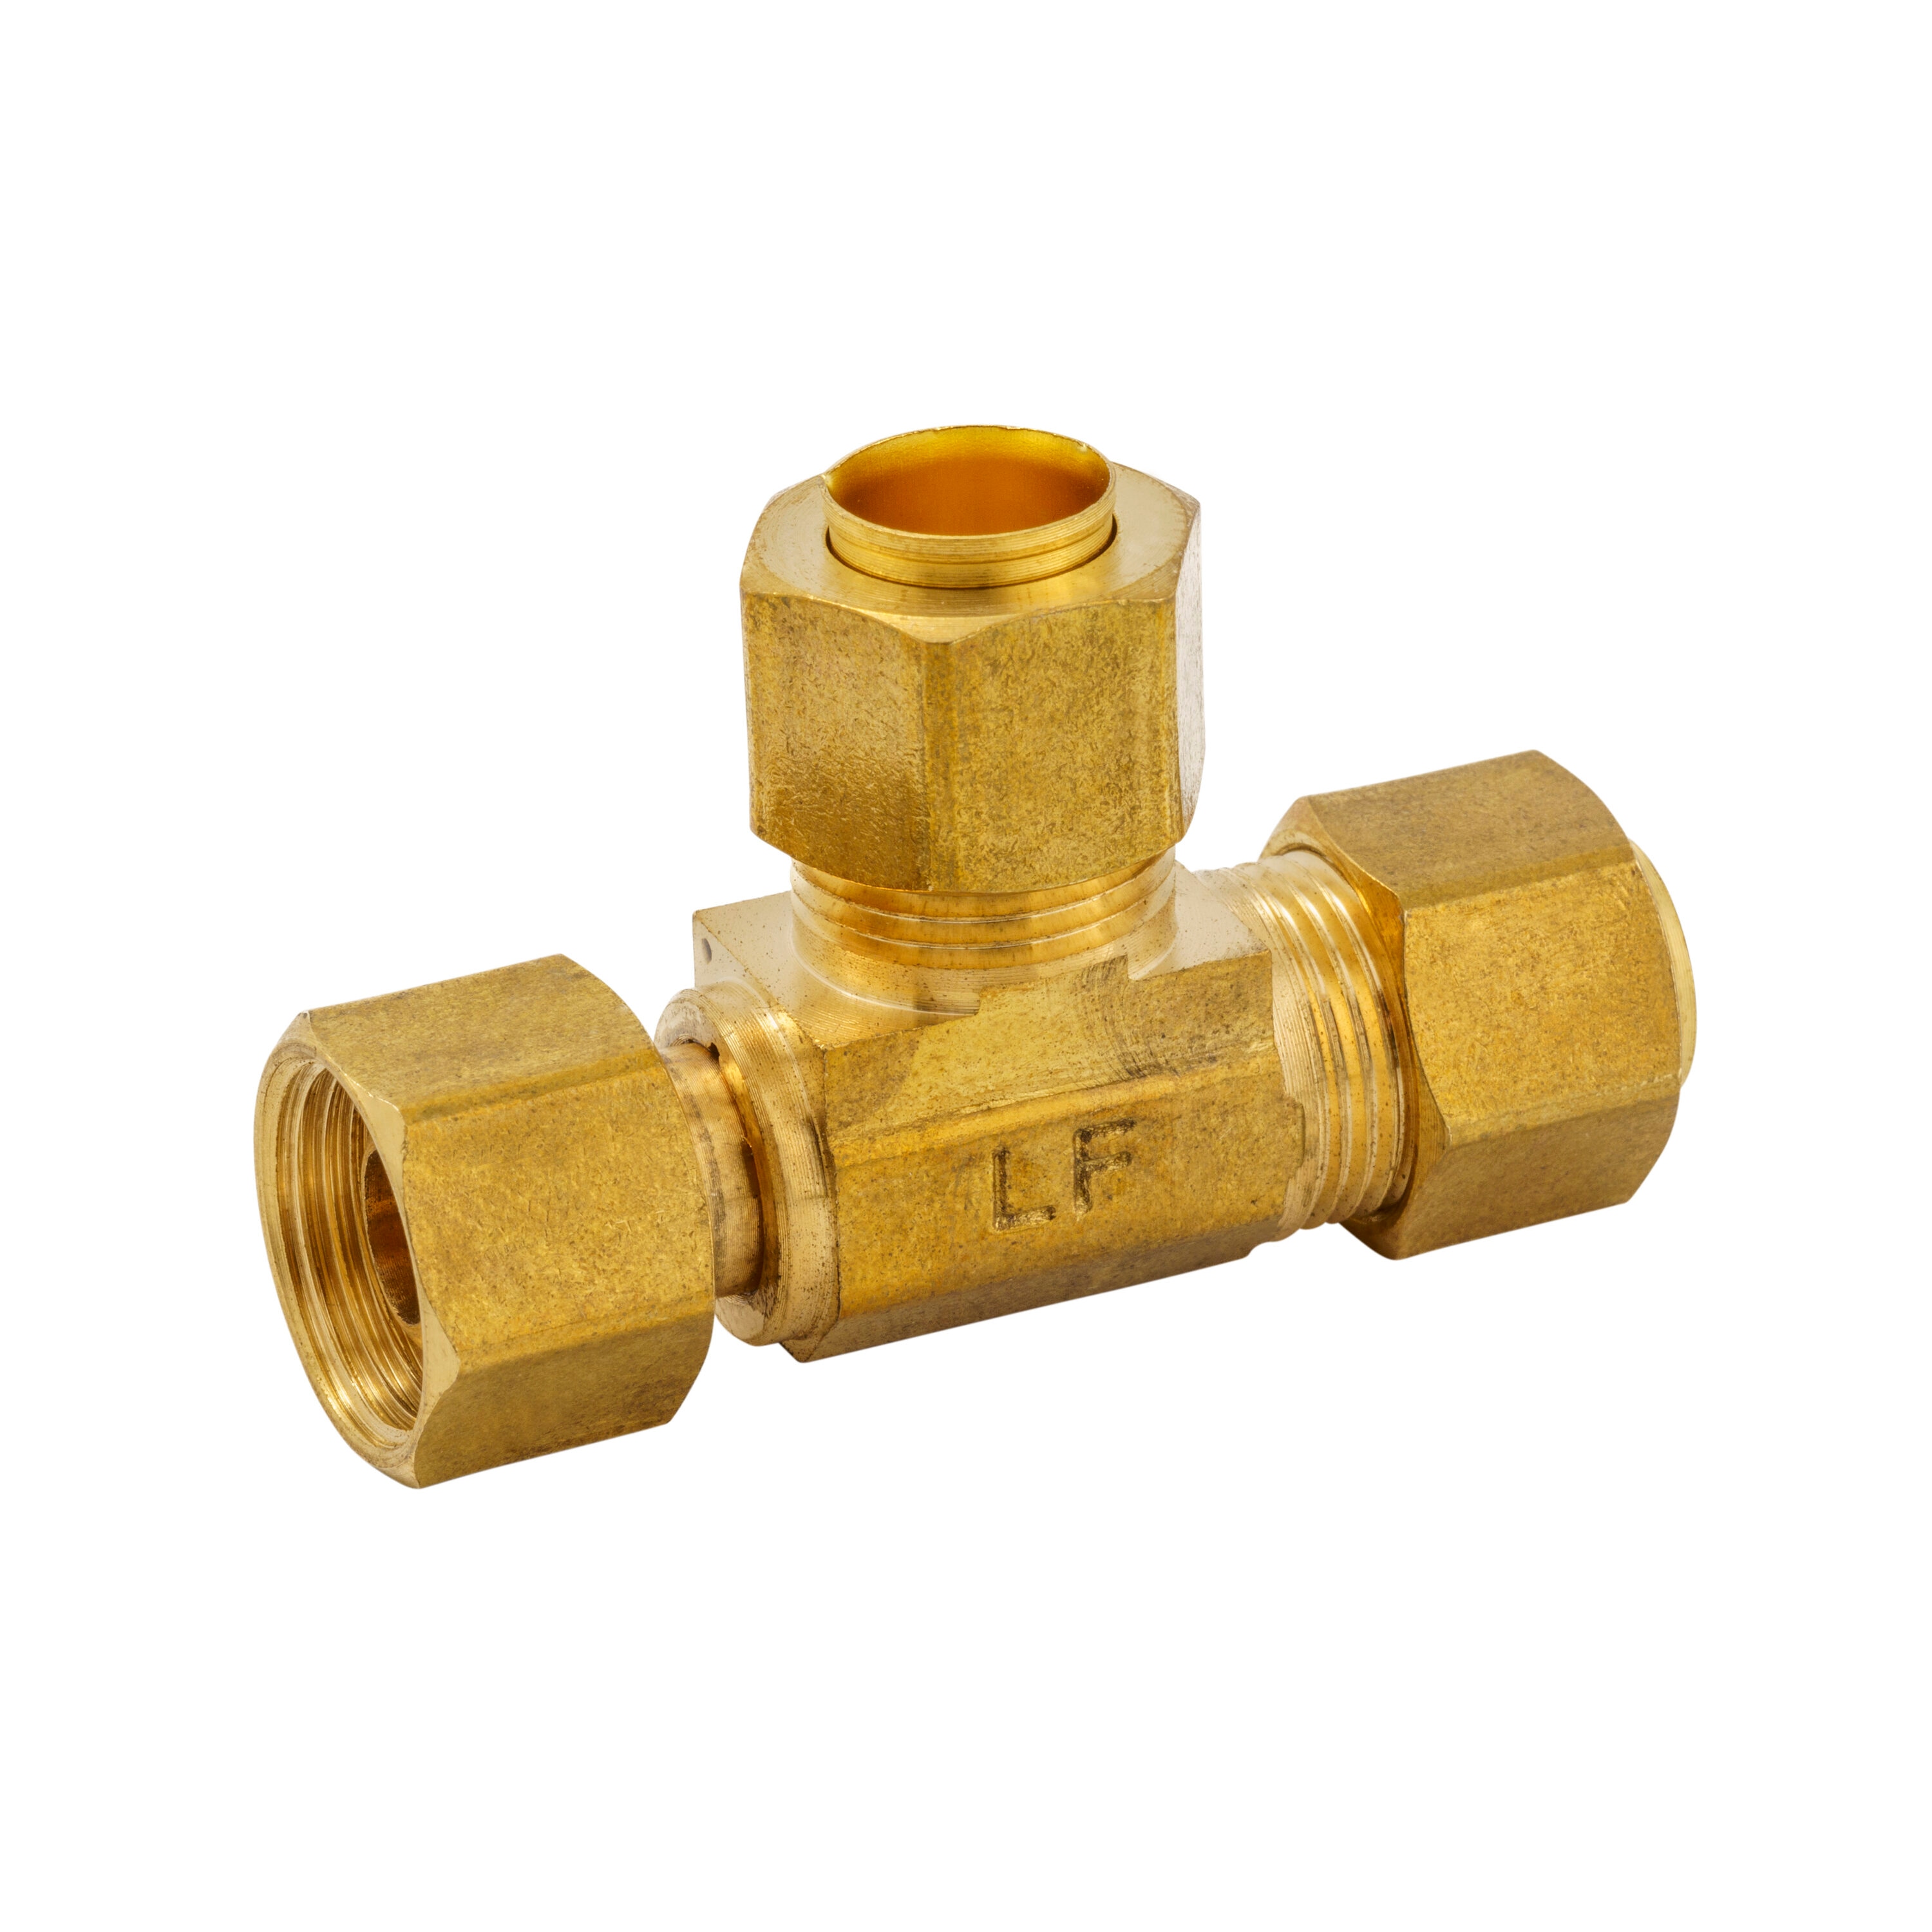 Brass Quick Tee Adapters For Ice Makers, Dishwashers & More!